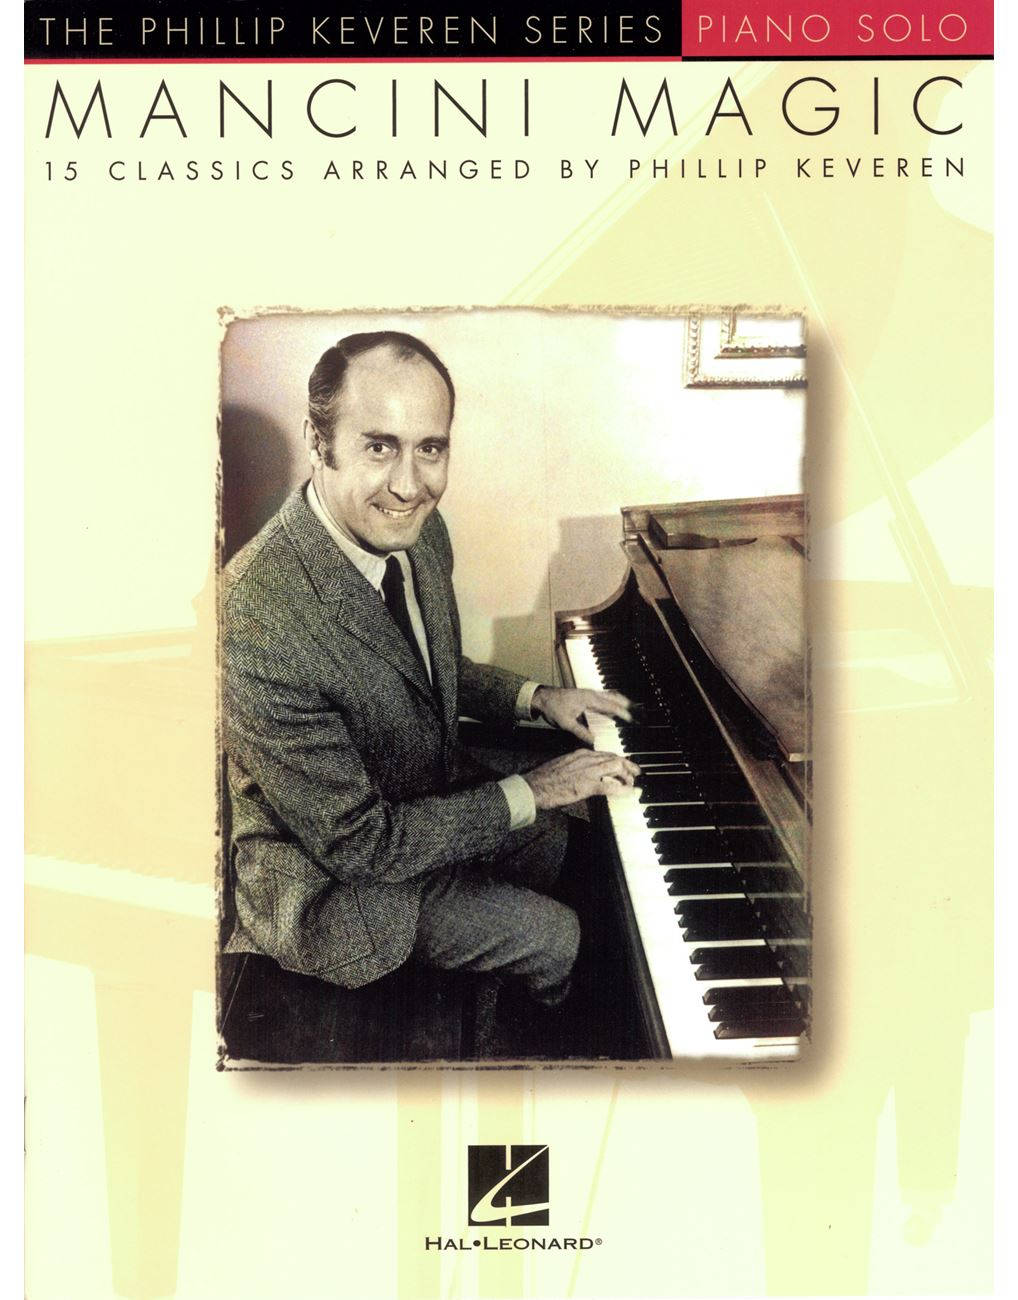 Henry Mancini In The Phillip Keveren Series Piano Solo 2011 Wallpaper